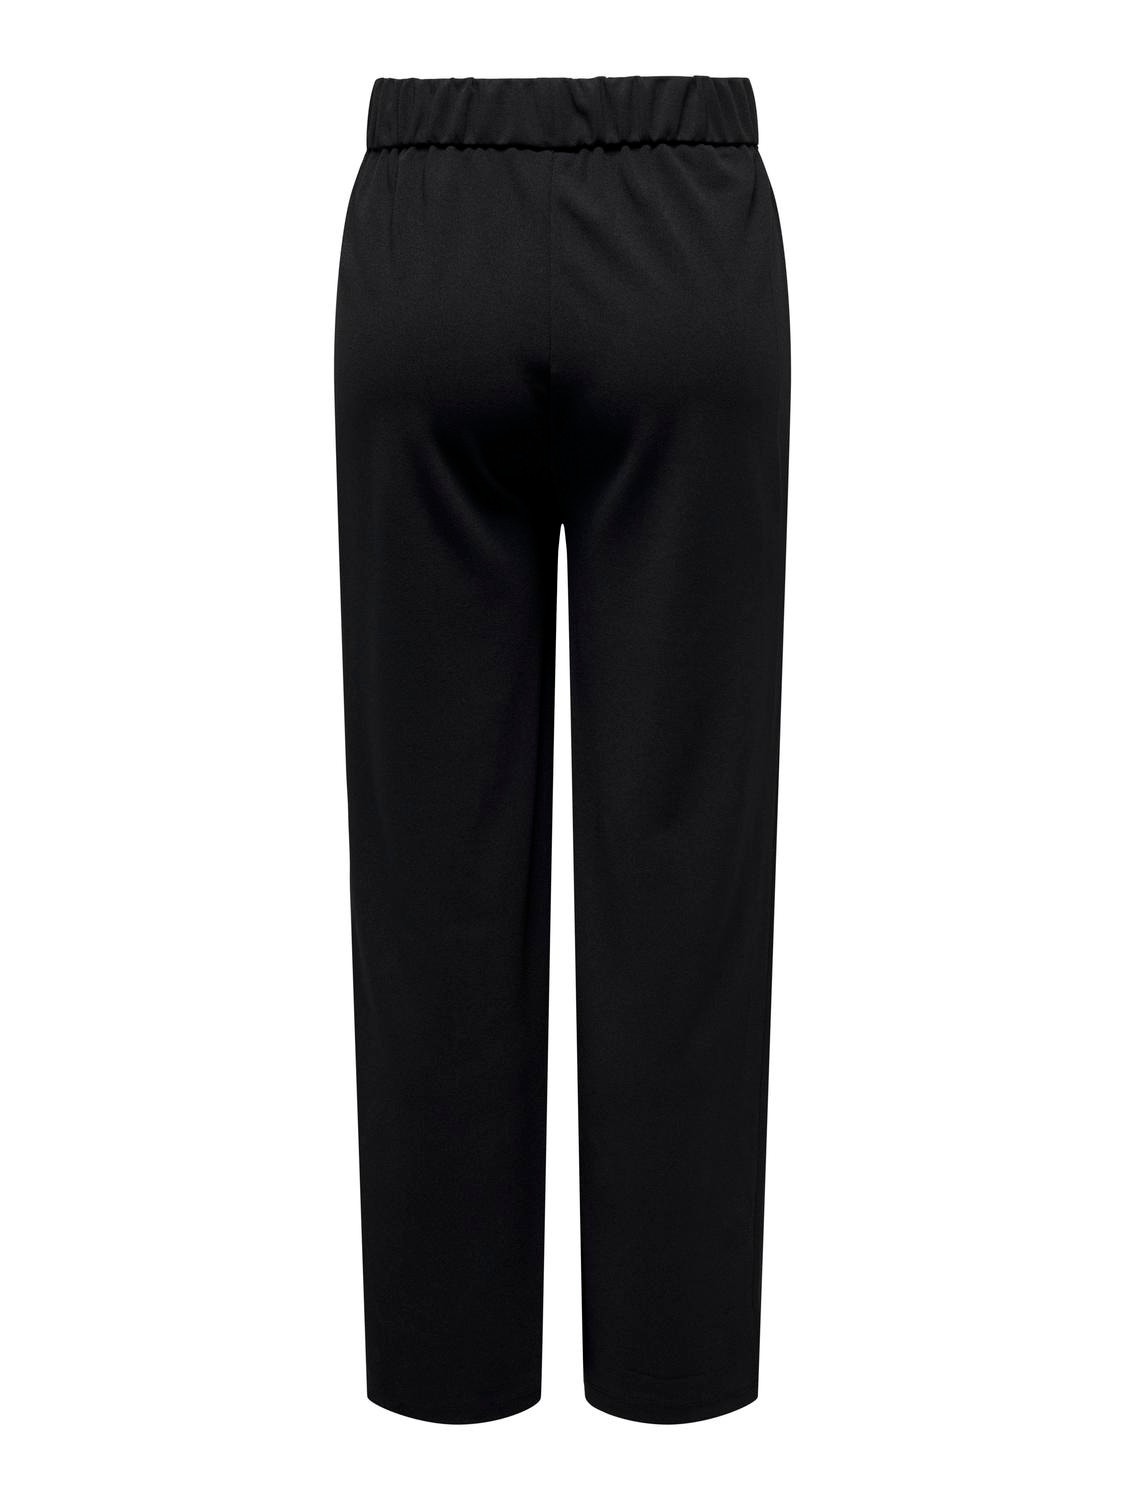 ONLY Straight Fit Trousers -Black - 15315392